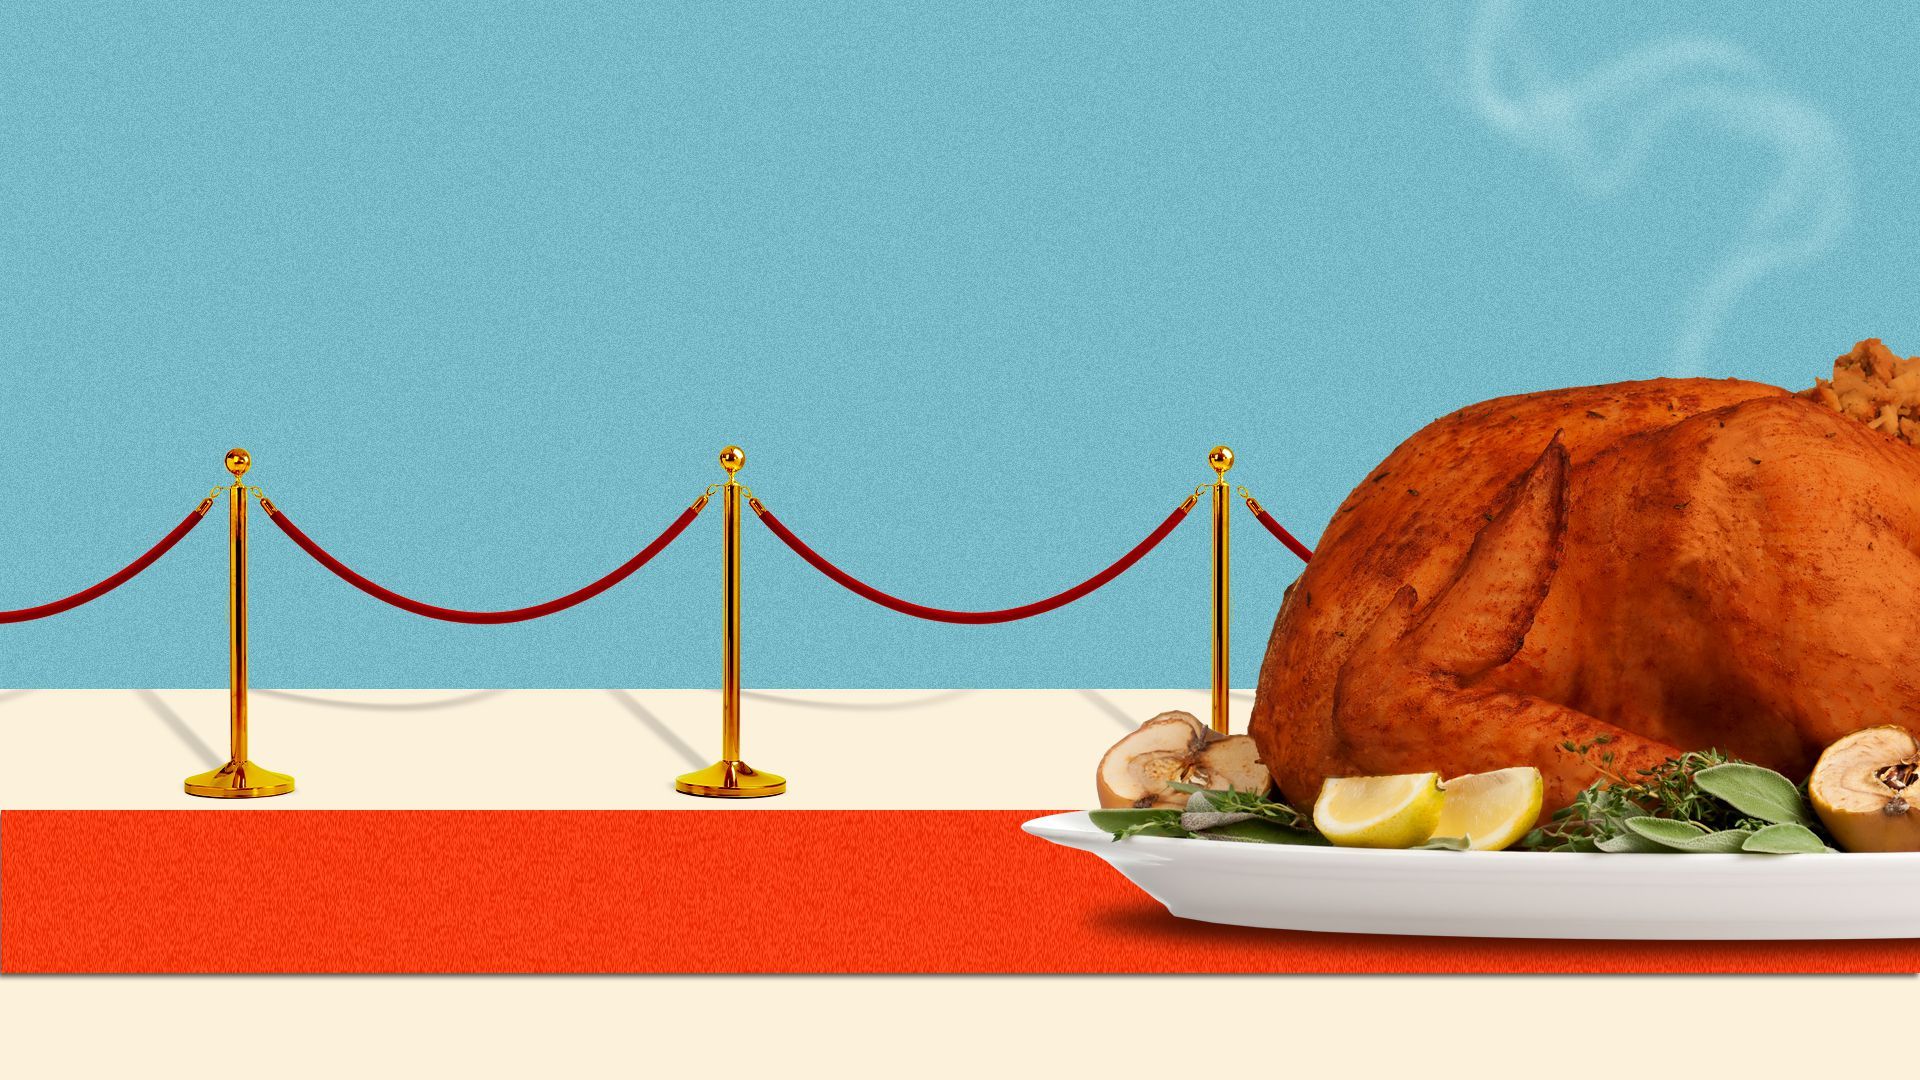 Illustration of a turkey on a table with a velvet rope and red carpet